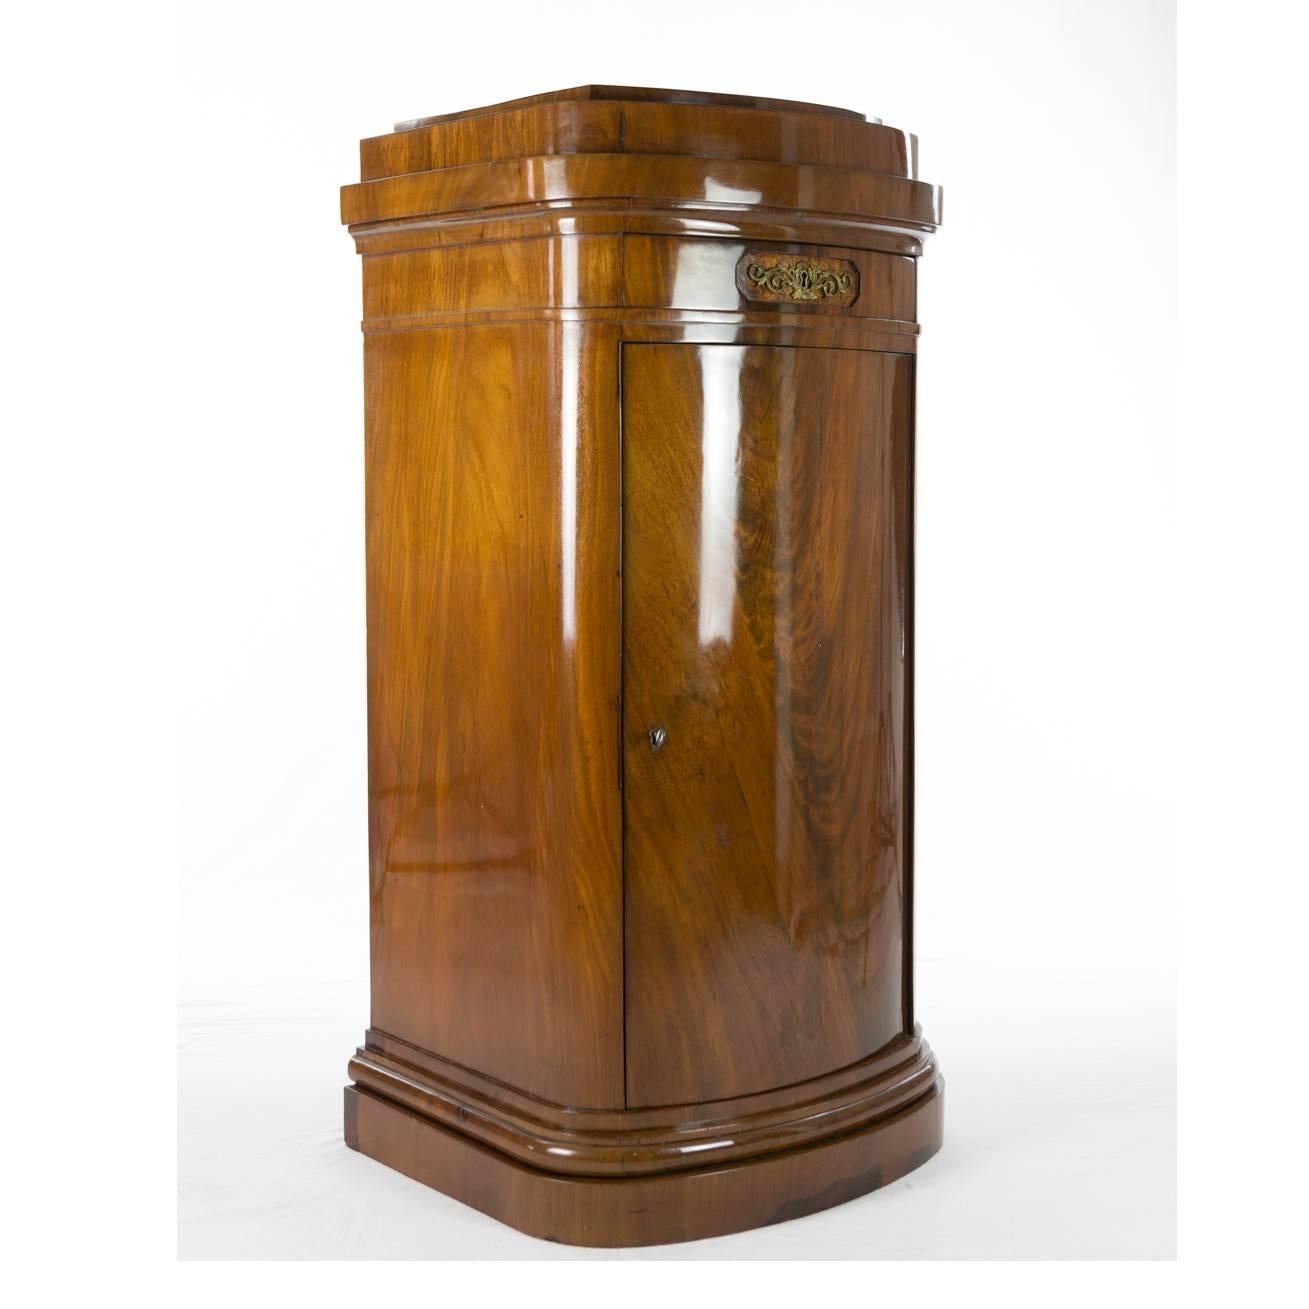 Rare Biedermeier pillar cupboard, probably Berlin, 1820-1830, rounded front, mahogany veneered, drawer and single-door, restored condition, shellac polished surface.